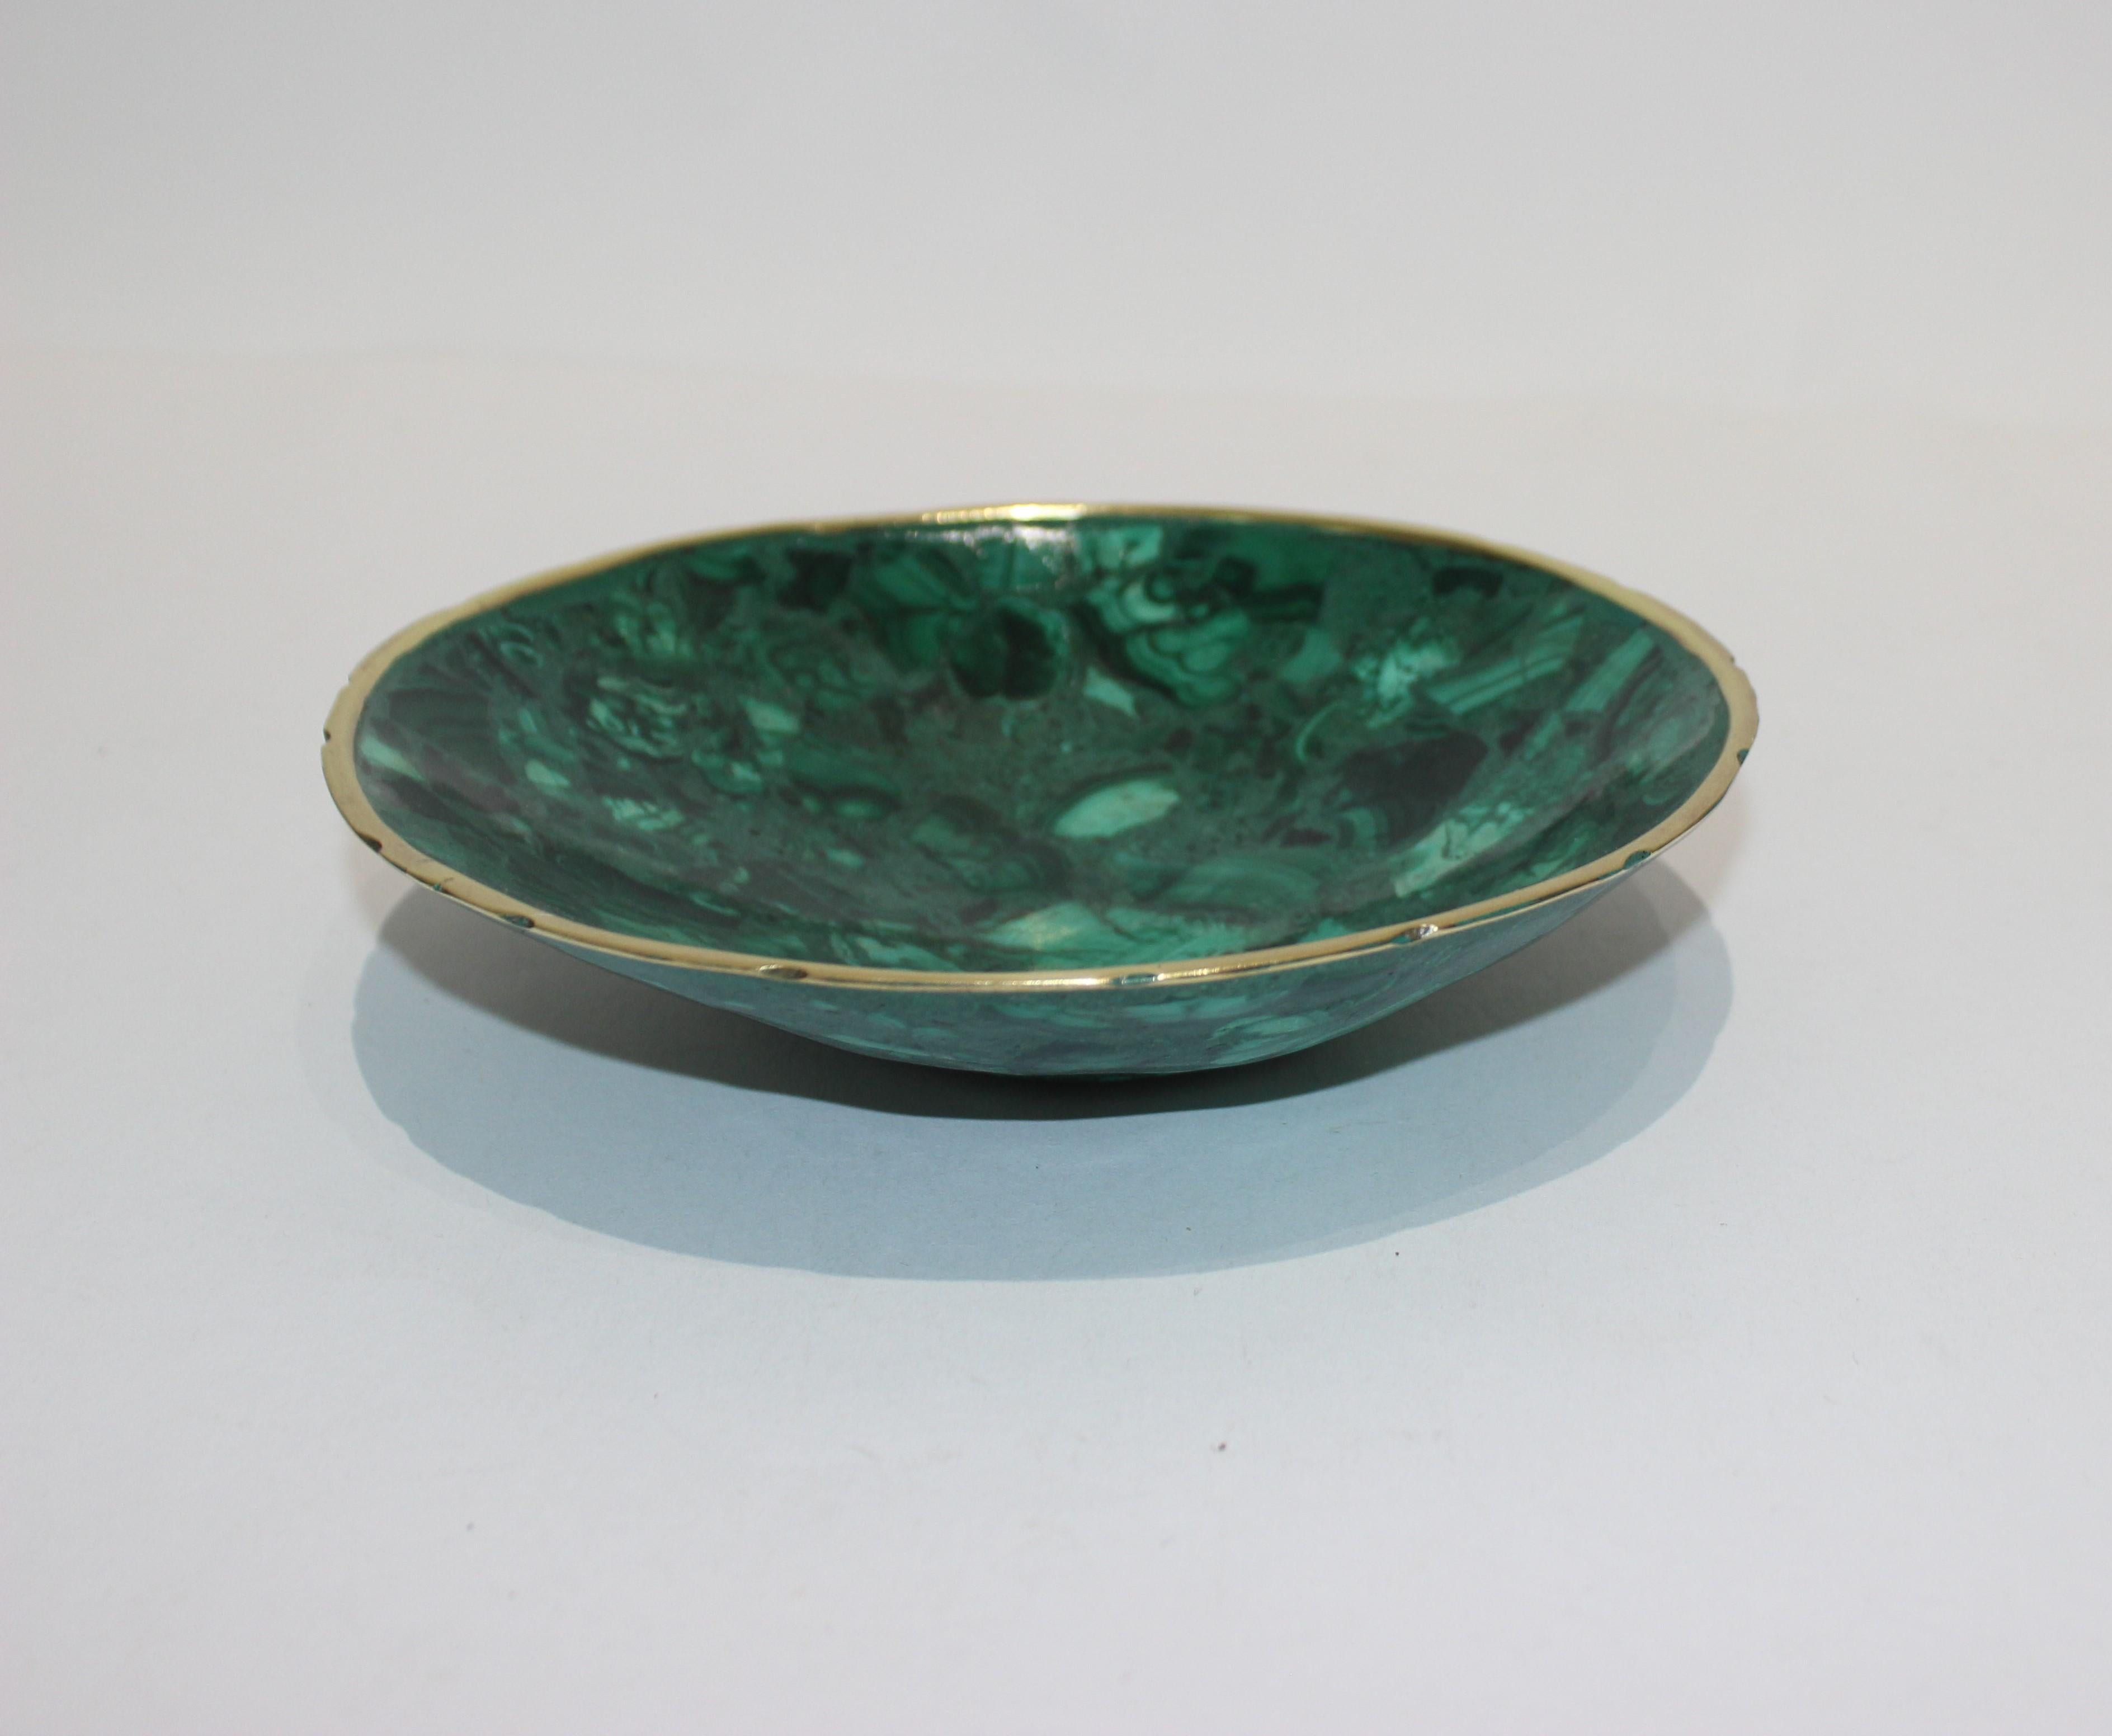 Handcrafted Malachite bowl with scalloped brass edging from a Palm Beach Estate

Note: the last picture shows the bowl in a staged setting -- only the bowl is for sale in this listing...